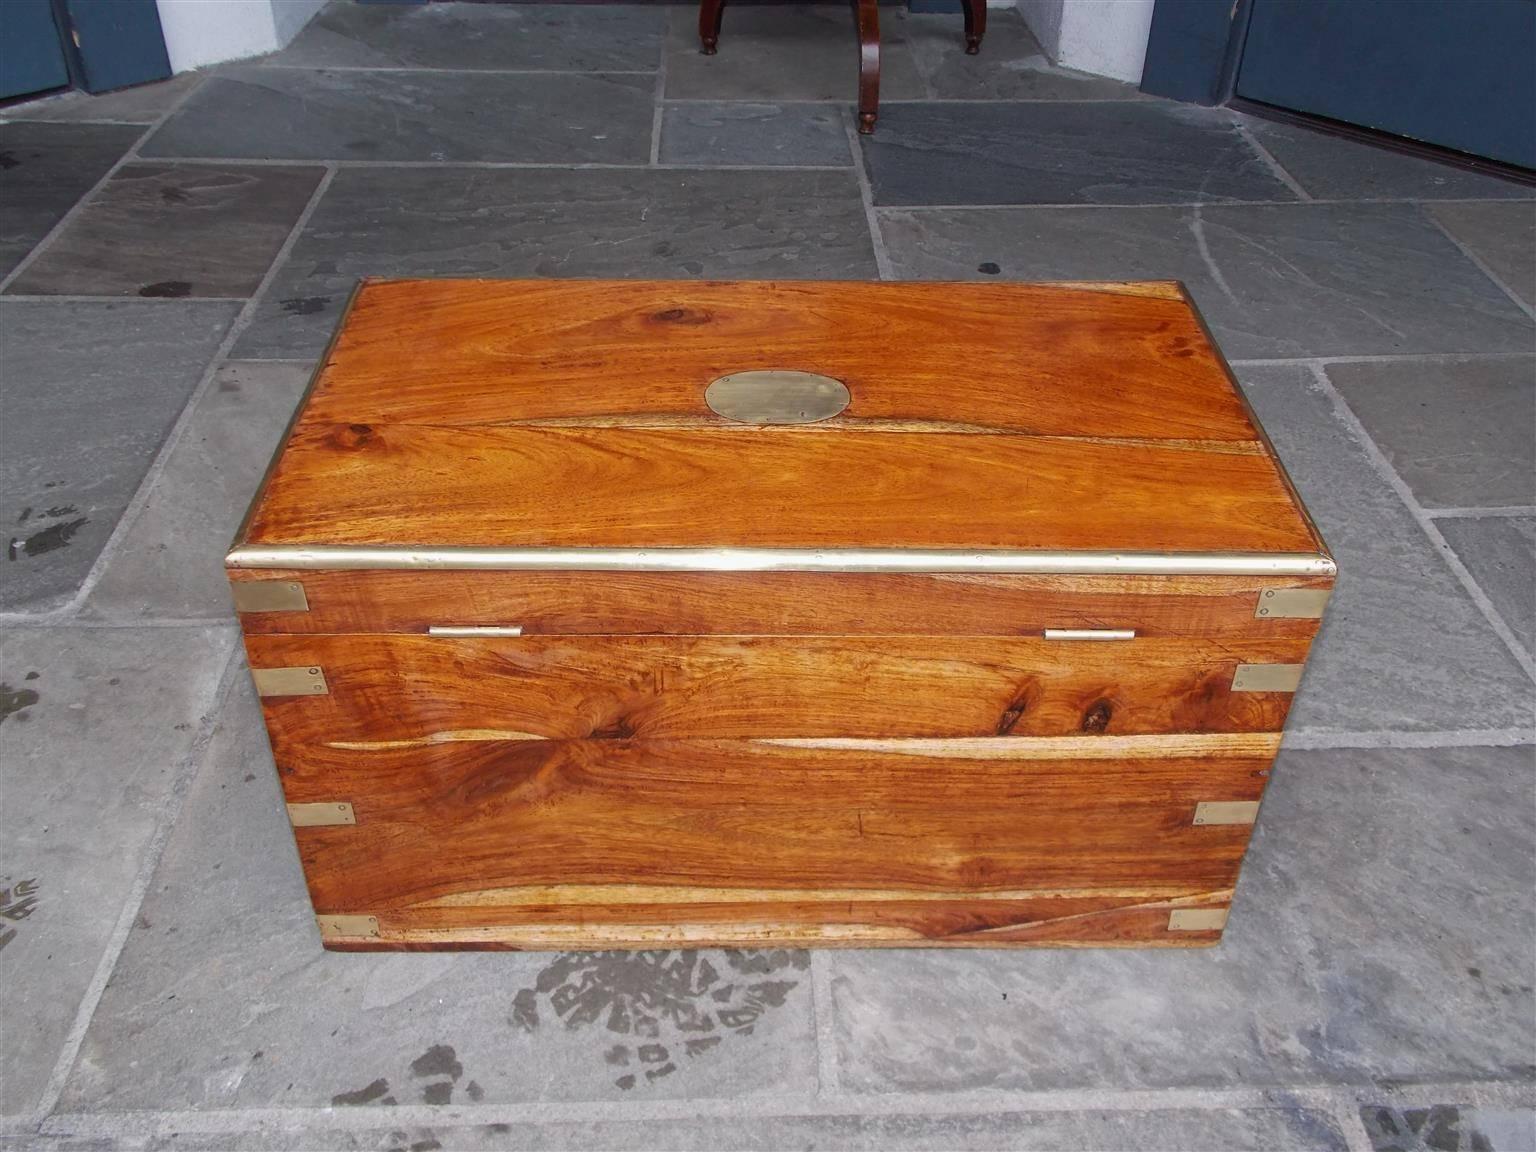 Hand-Carved English Camphor Wood Brass Mounted and Hinged Export Trunk, Circa 1830